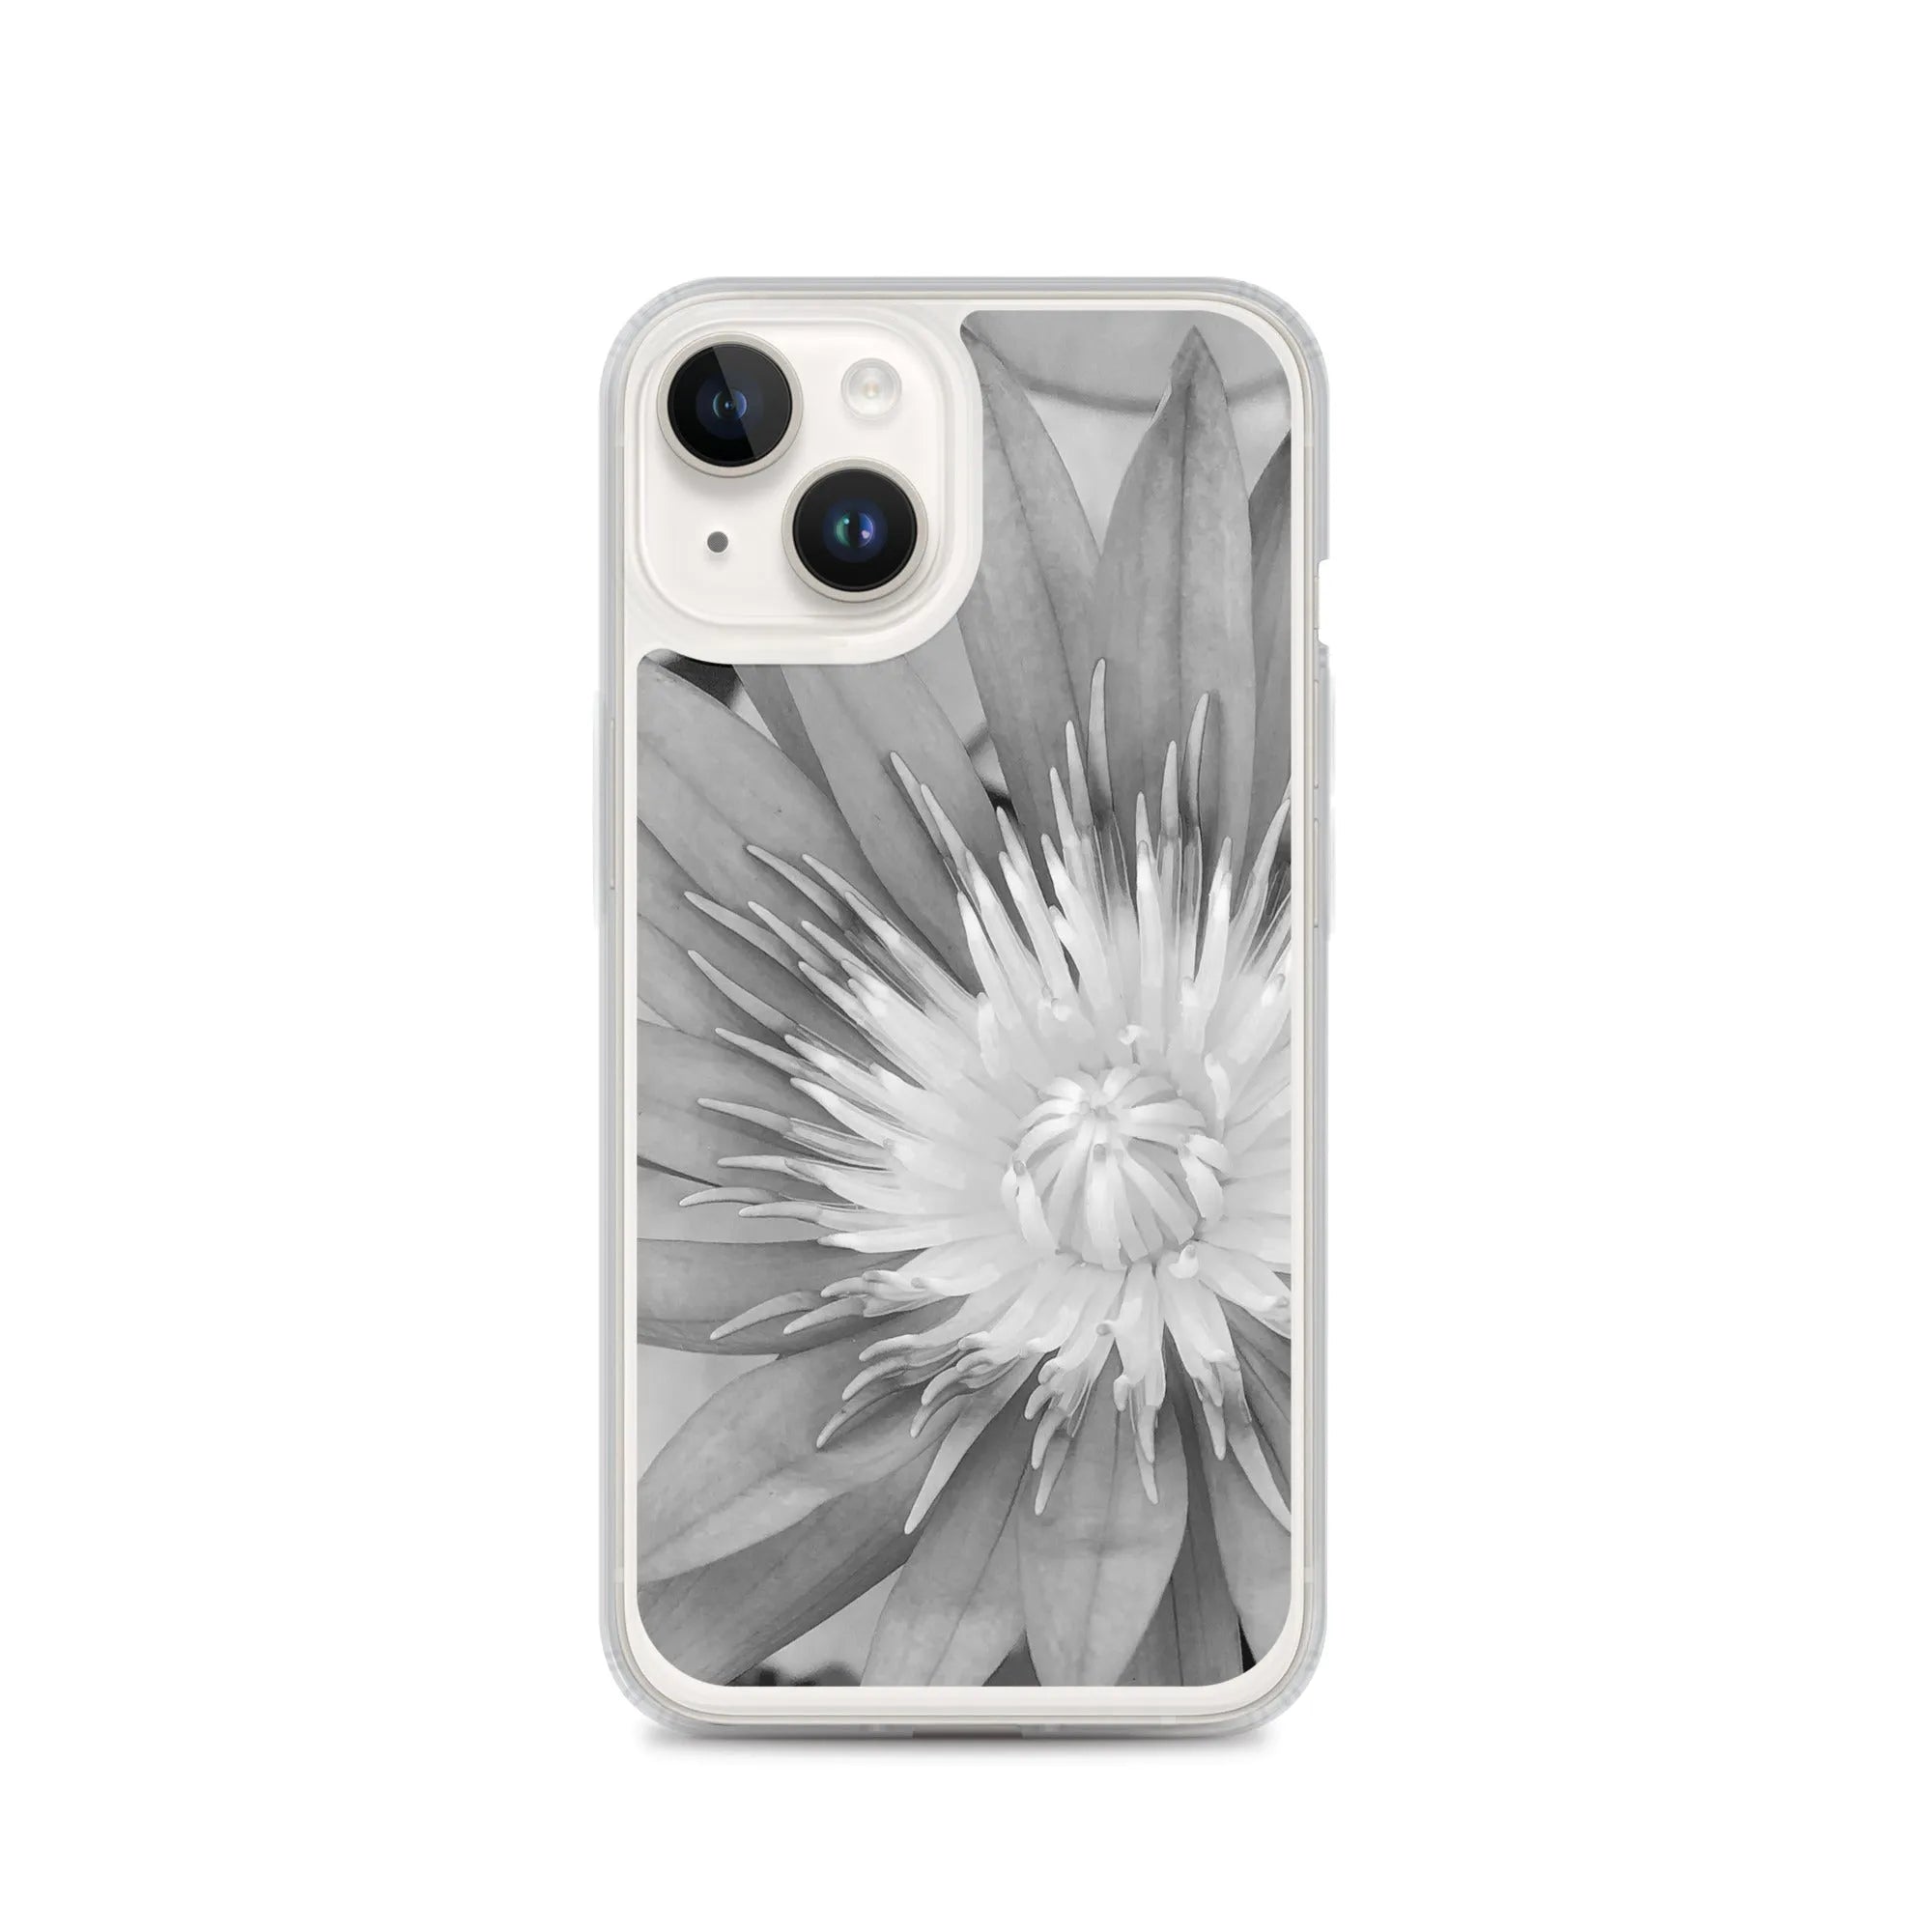 Lilliput Floral Iphone Case - Black And White - Iphone 14 - Mobile Phone Cases - Aesthetic Art